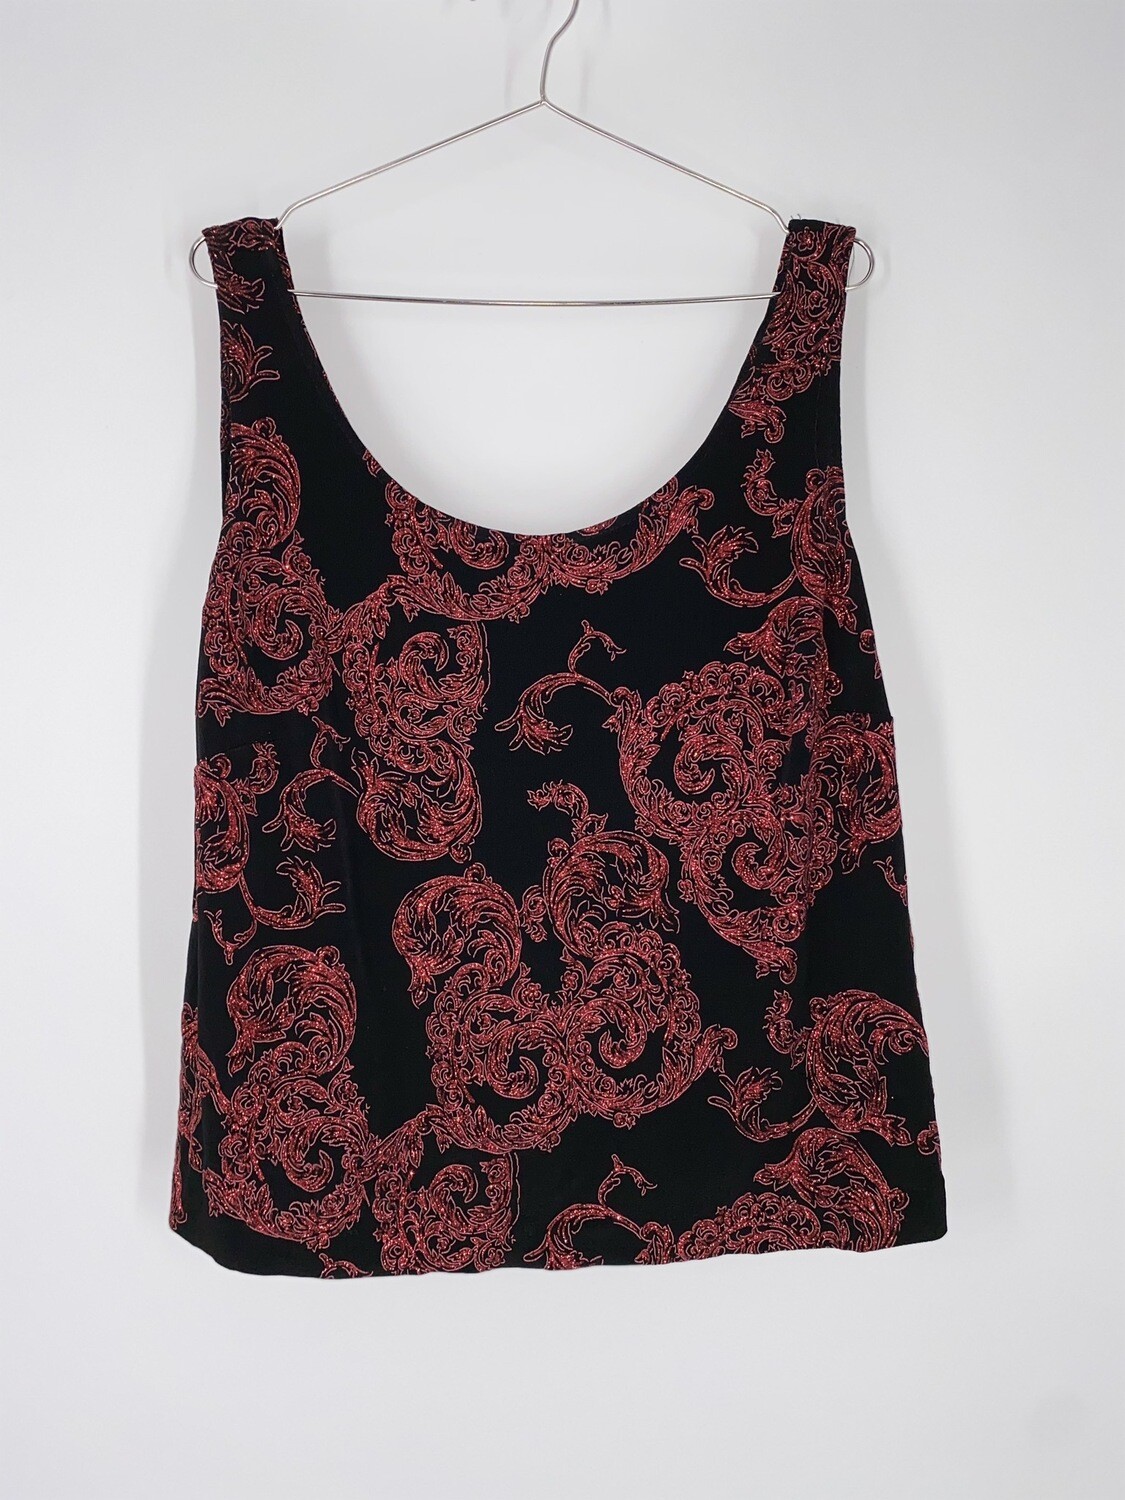 Alex Evenings Sleeveless Red and Black Glitter Top Size L